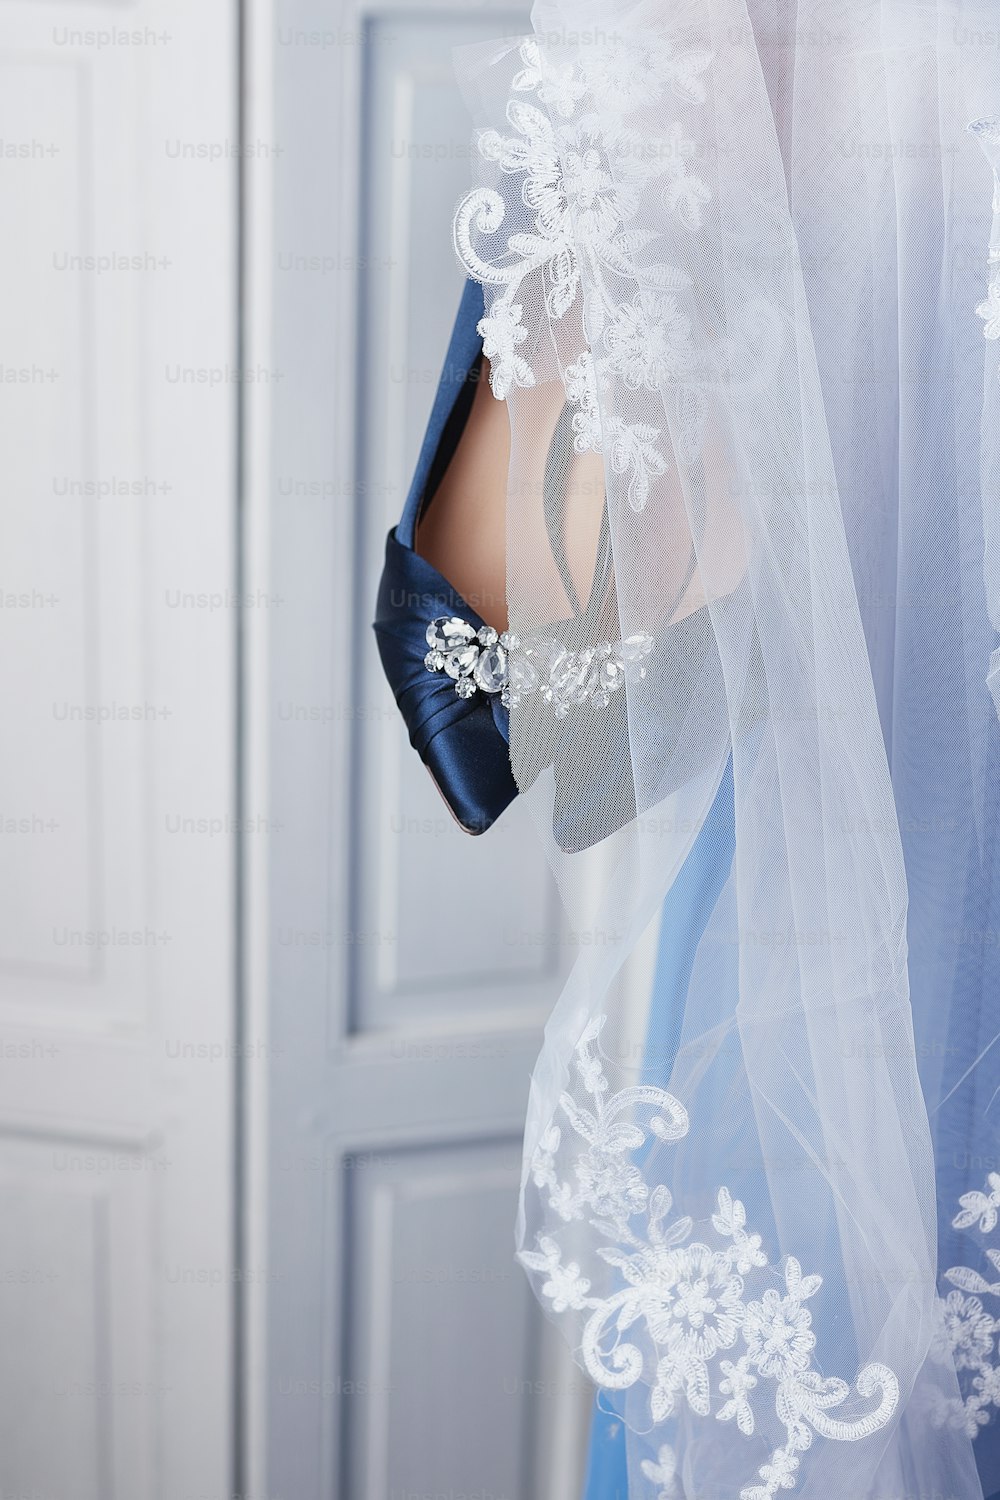 a bride's wedding dress with a veil and shoes